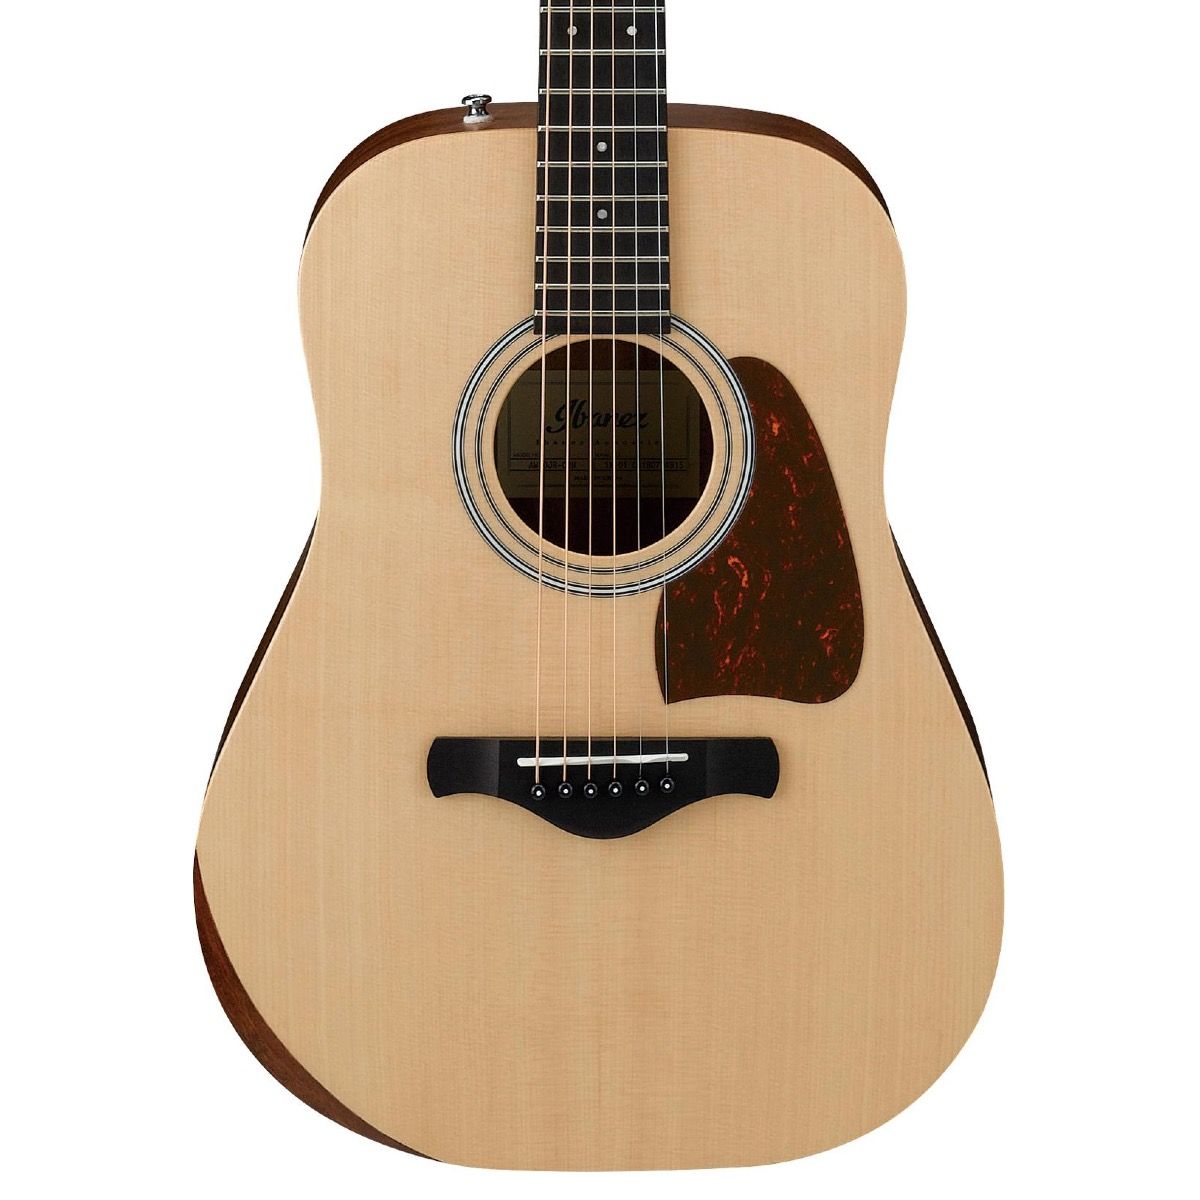 Ibanez AW50JROPN Artwood Acoustic Electric Guitar - Open Pore Natural